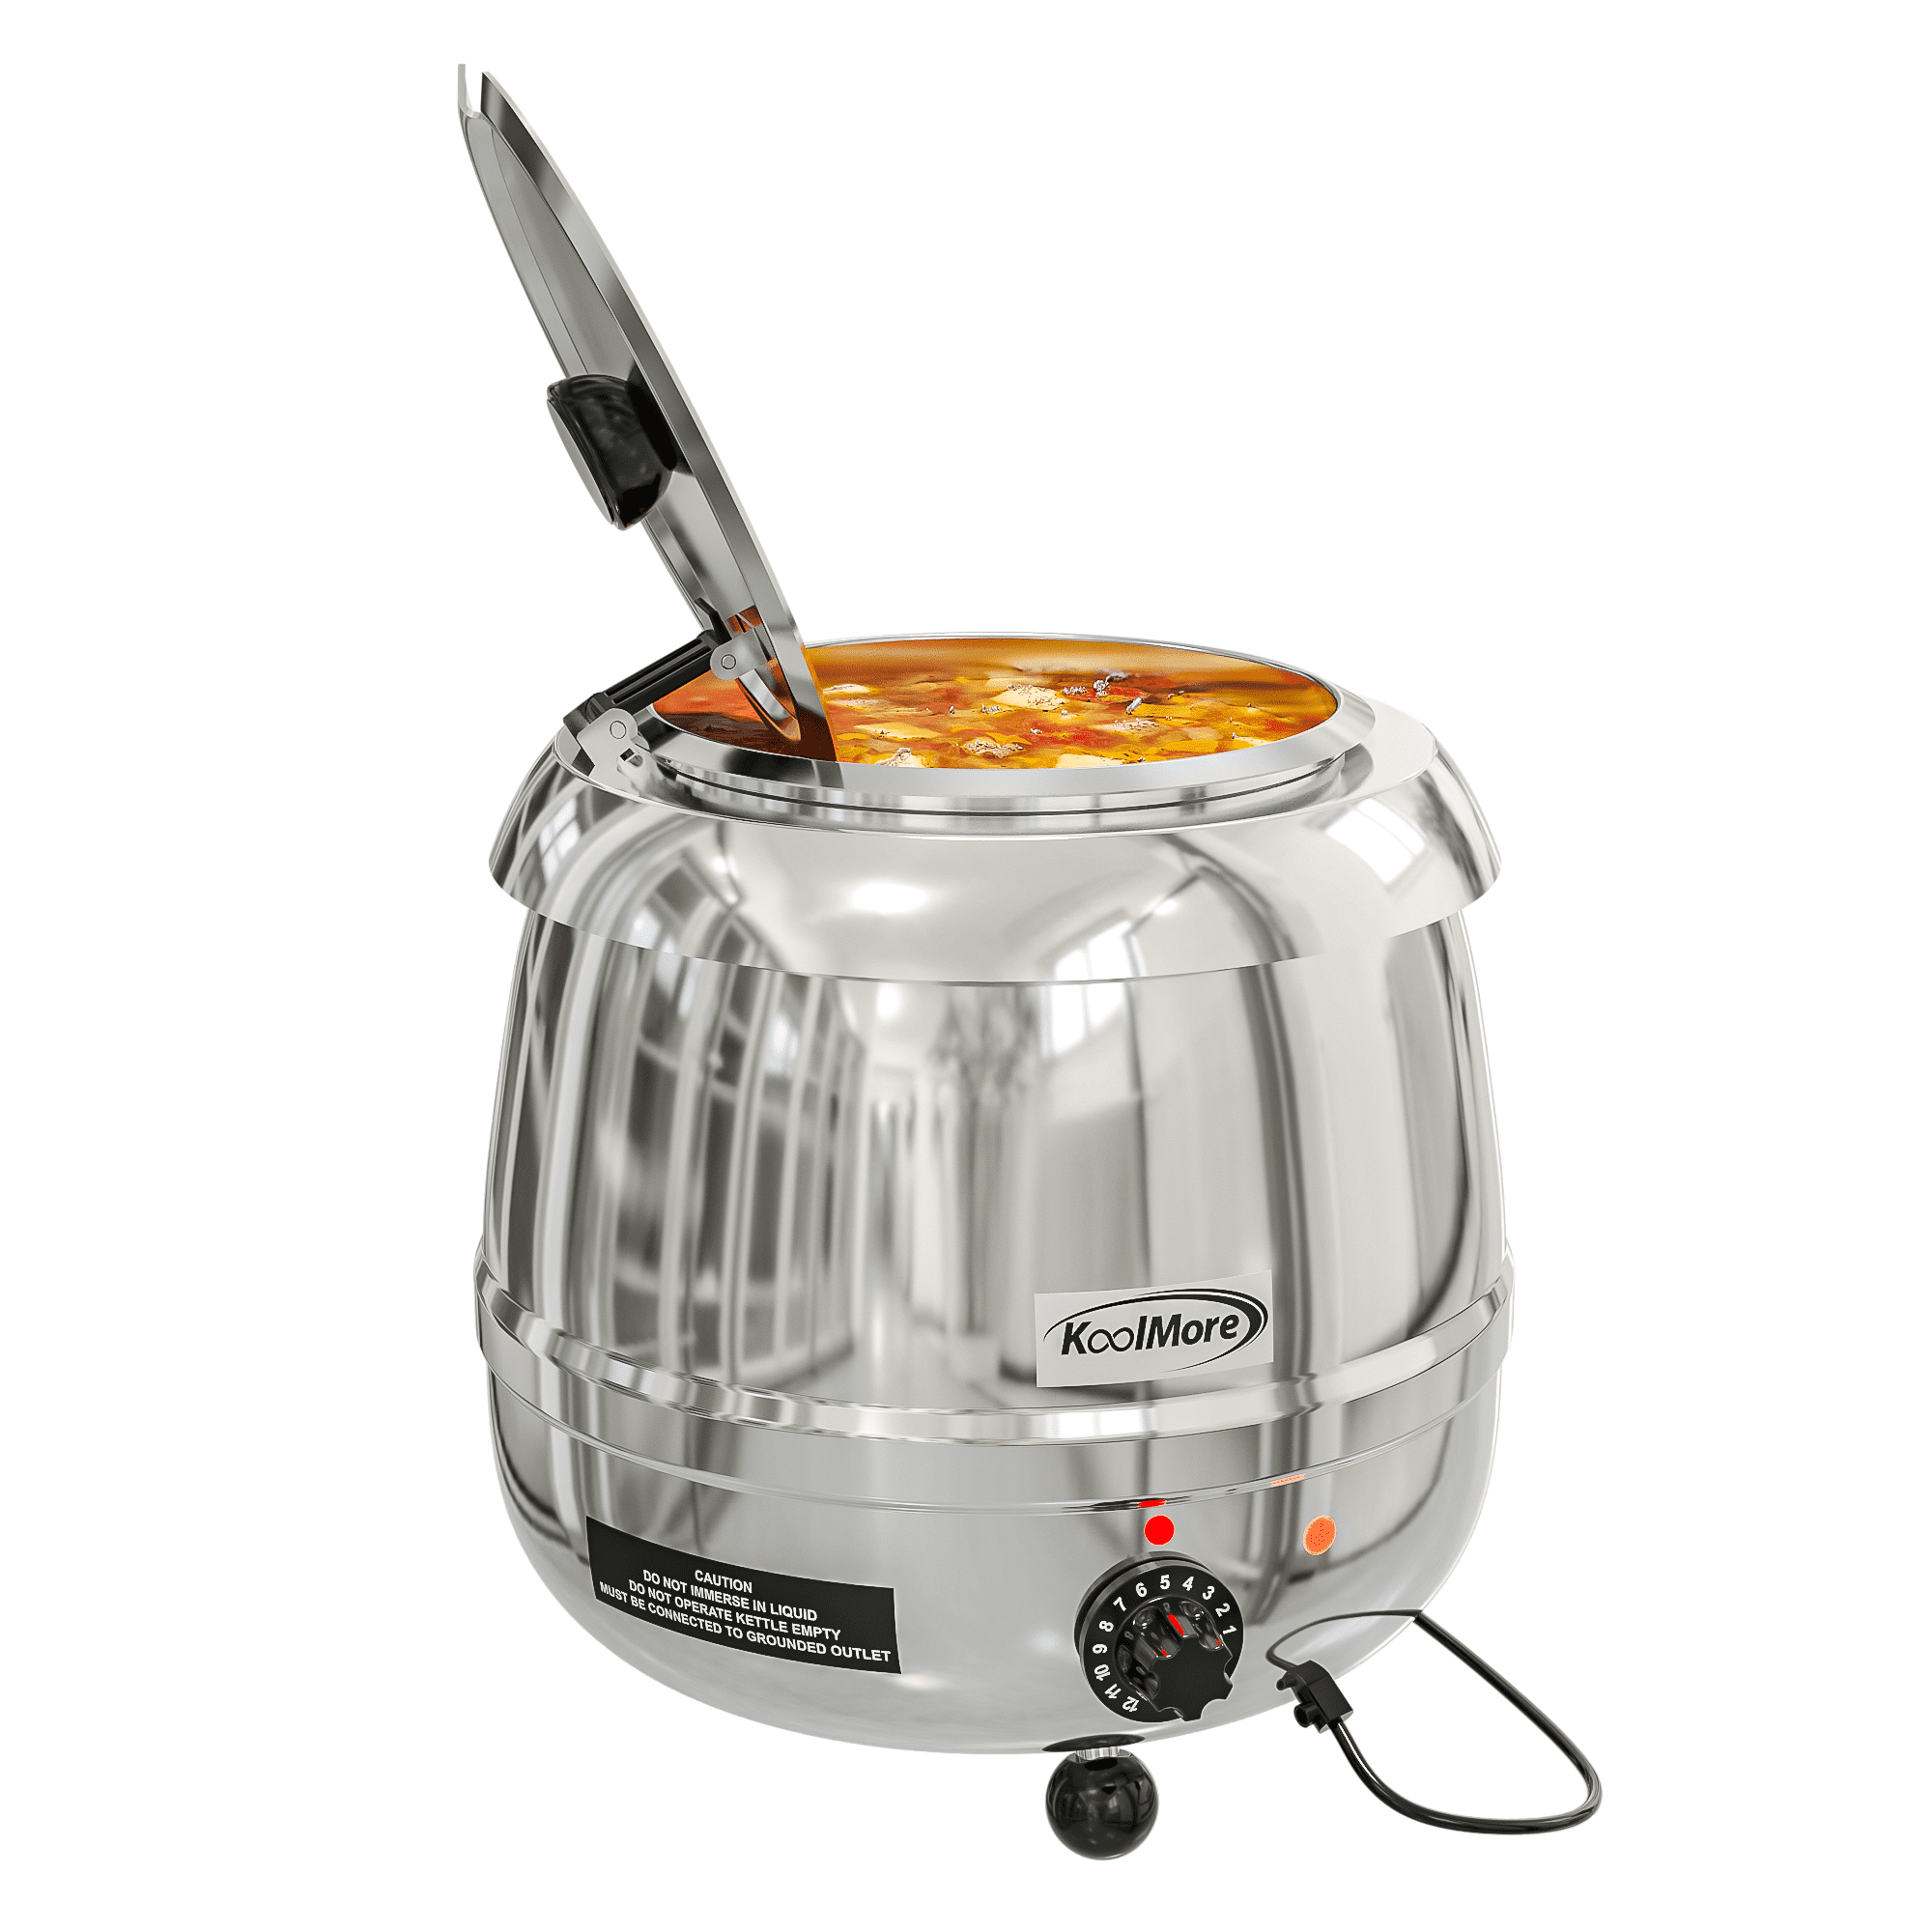 Electric Soup Warmer 11 QT - American Party RentalAmerican Party Rental